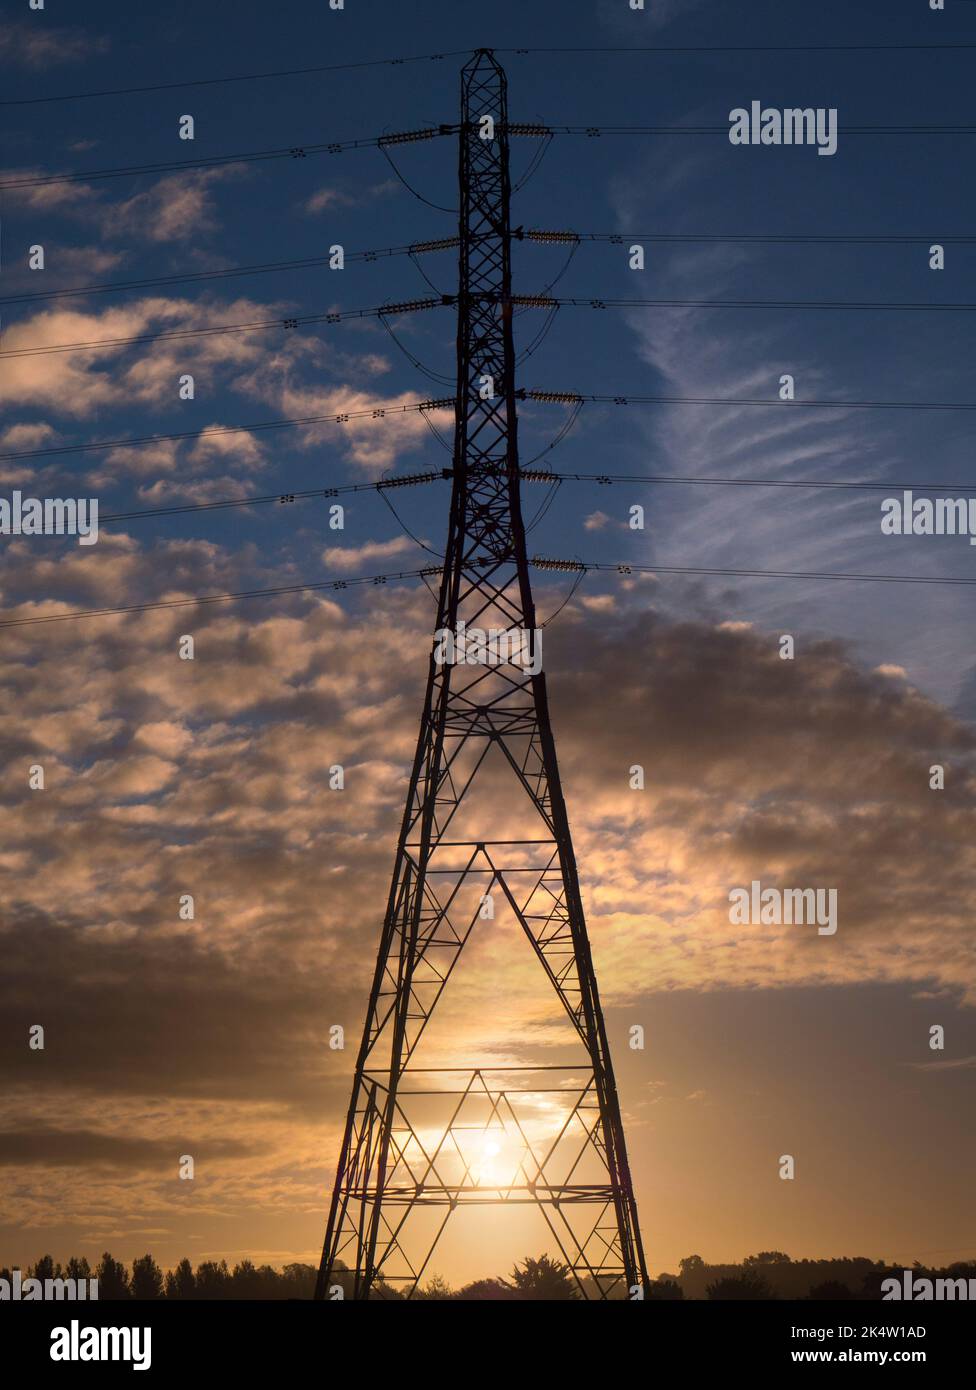 I love electricity pylons; I find their abstract, gaunt shapes endlessly fascinating. Here we see a giant pylon in a wheat field in Lower Radley Villa Stock Photo